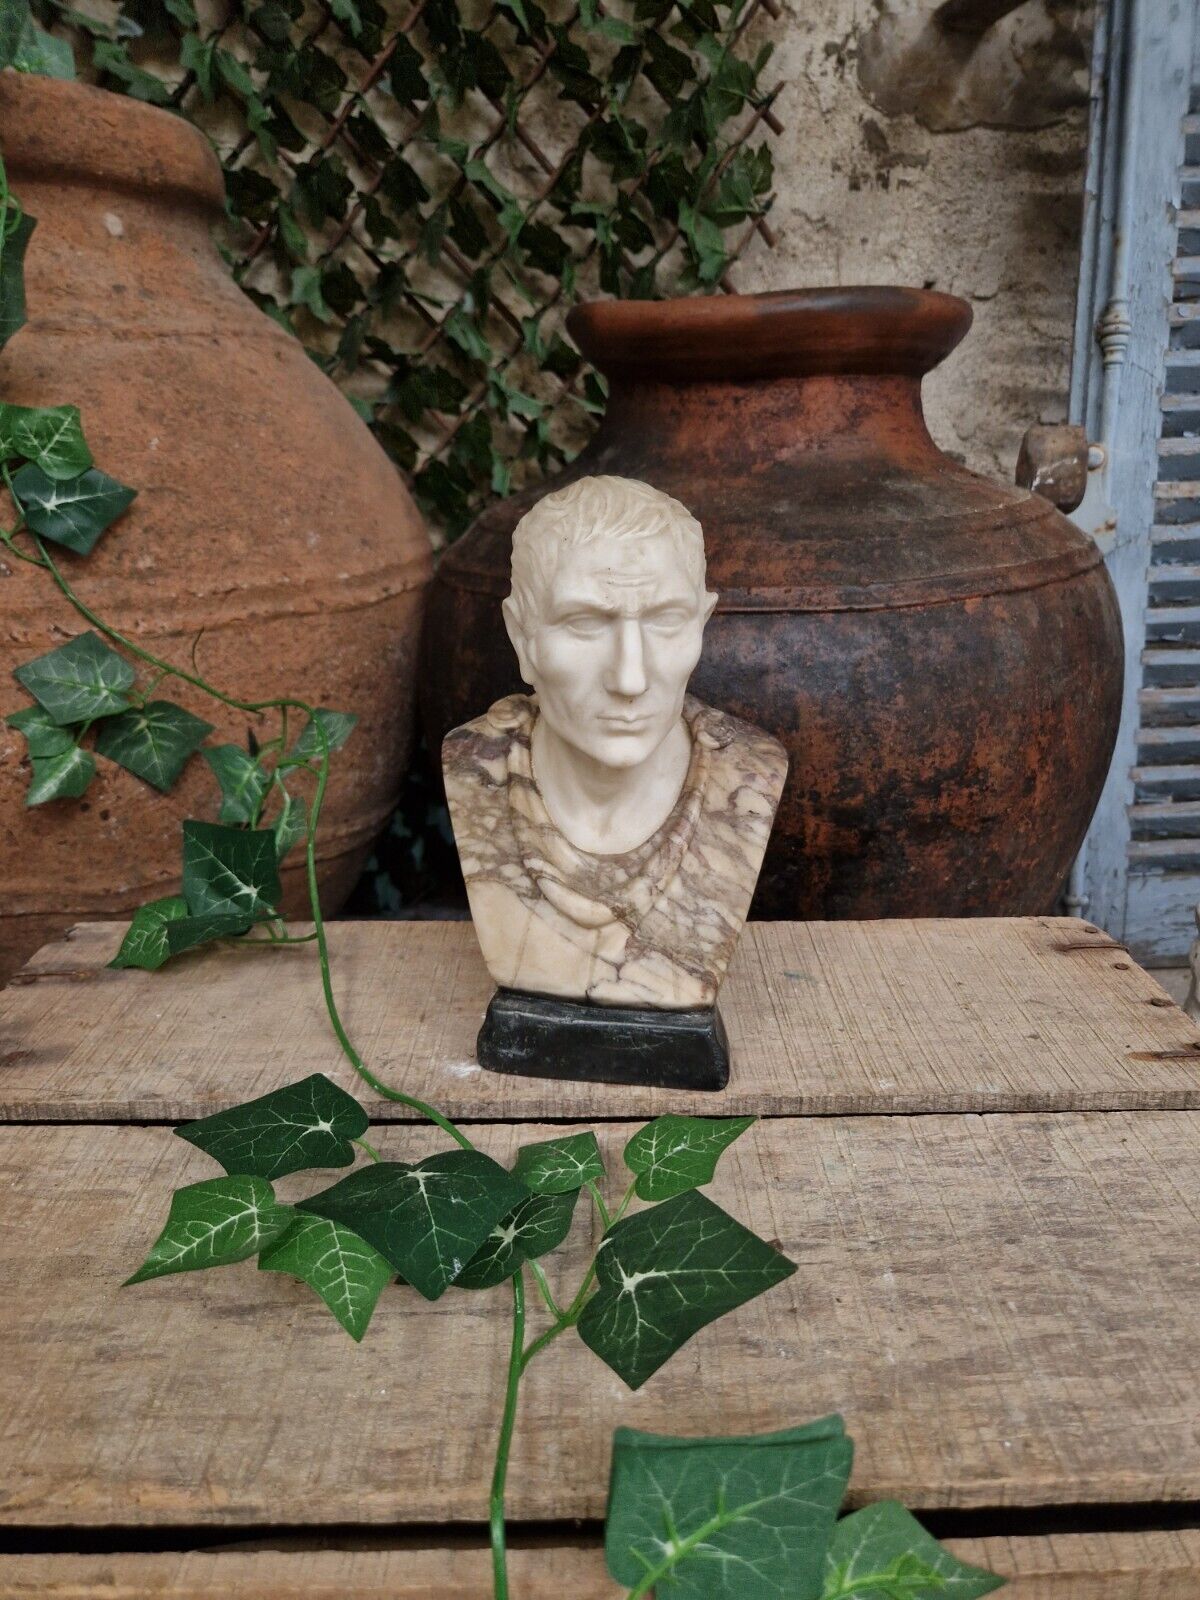 We are delighted to offer for sale this Marble Bust of Julius Caesar

The sculpture is carved from white and brown veined marble


Circa 1950
Hand carved

French/Italian Origin

Heavy


Dimensions - 26 H x 16 x 11 cm

Listing Description

All of our